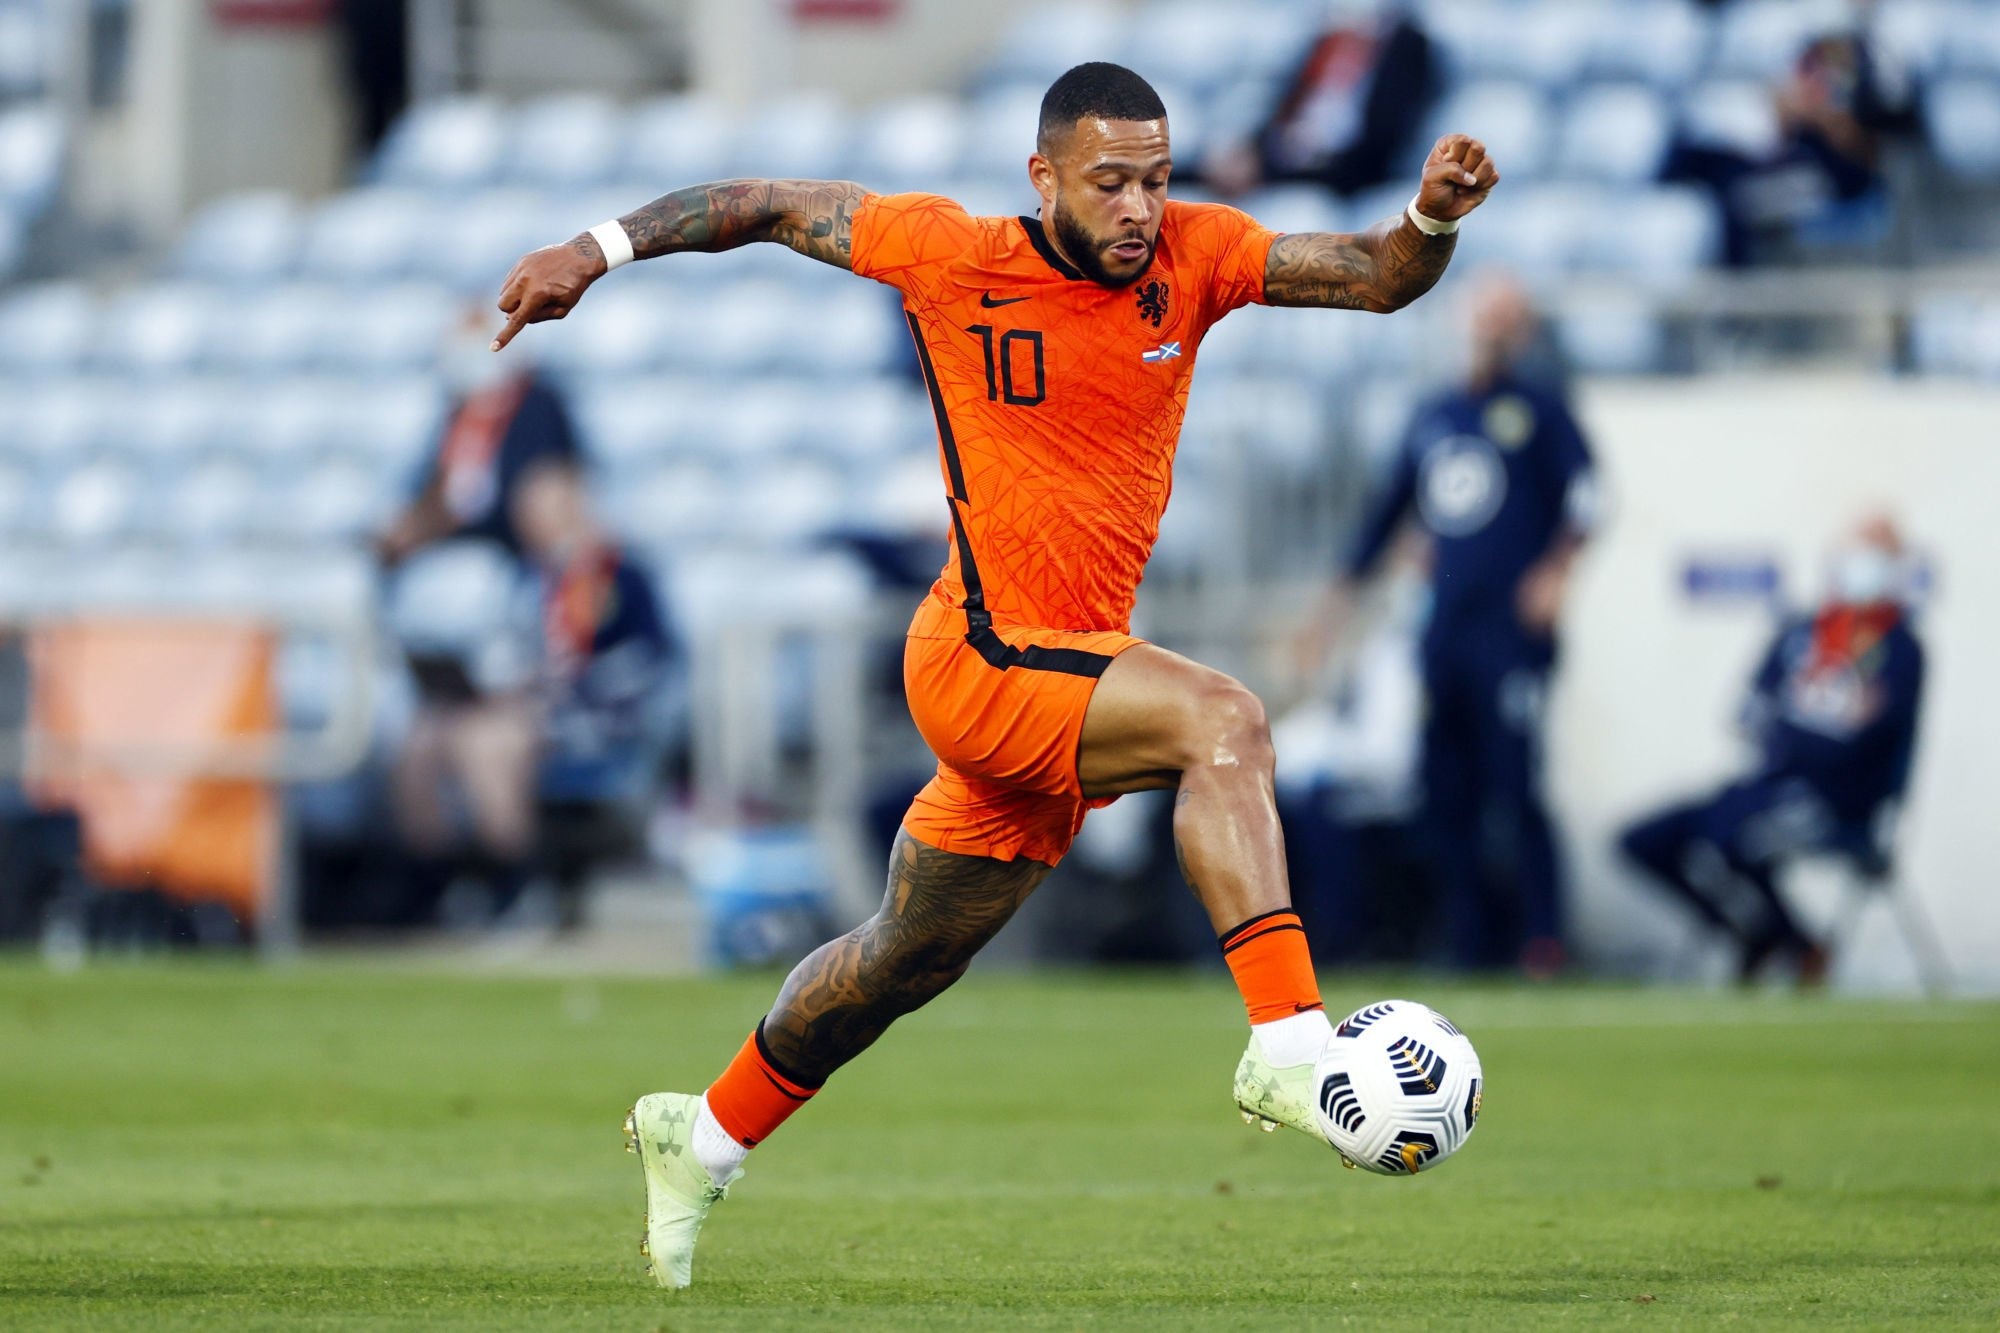 FC Barcelone memphis depay, Transfer news, Unintended announcement, Exciting signing, 2000x1340 HD Desktop